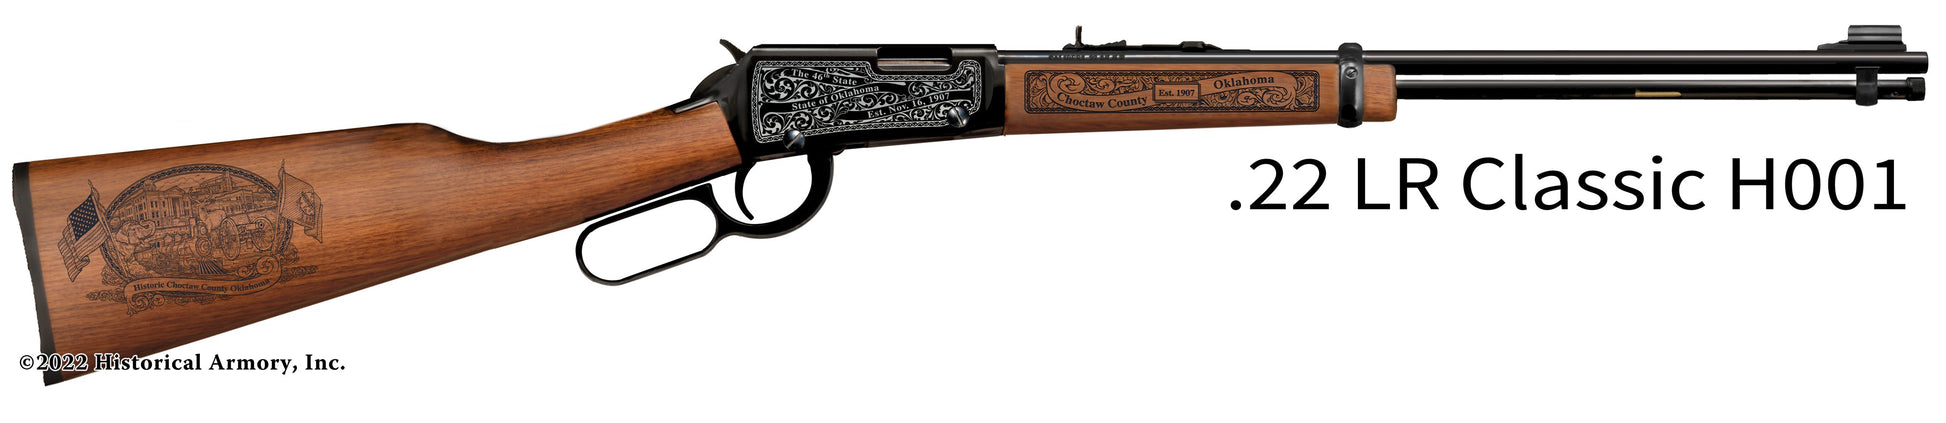 Choctaw County Oklahoma Engraved Henry H001 Rifle